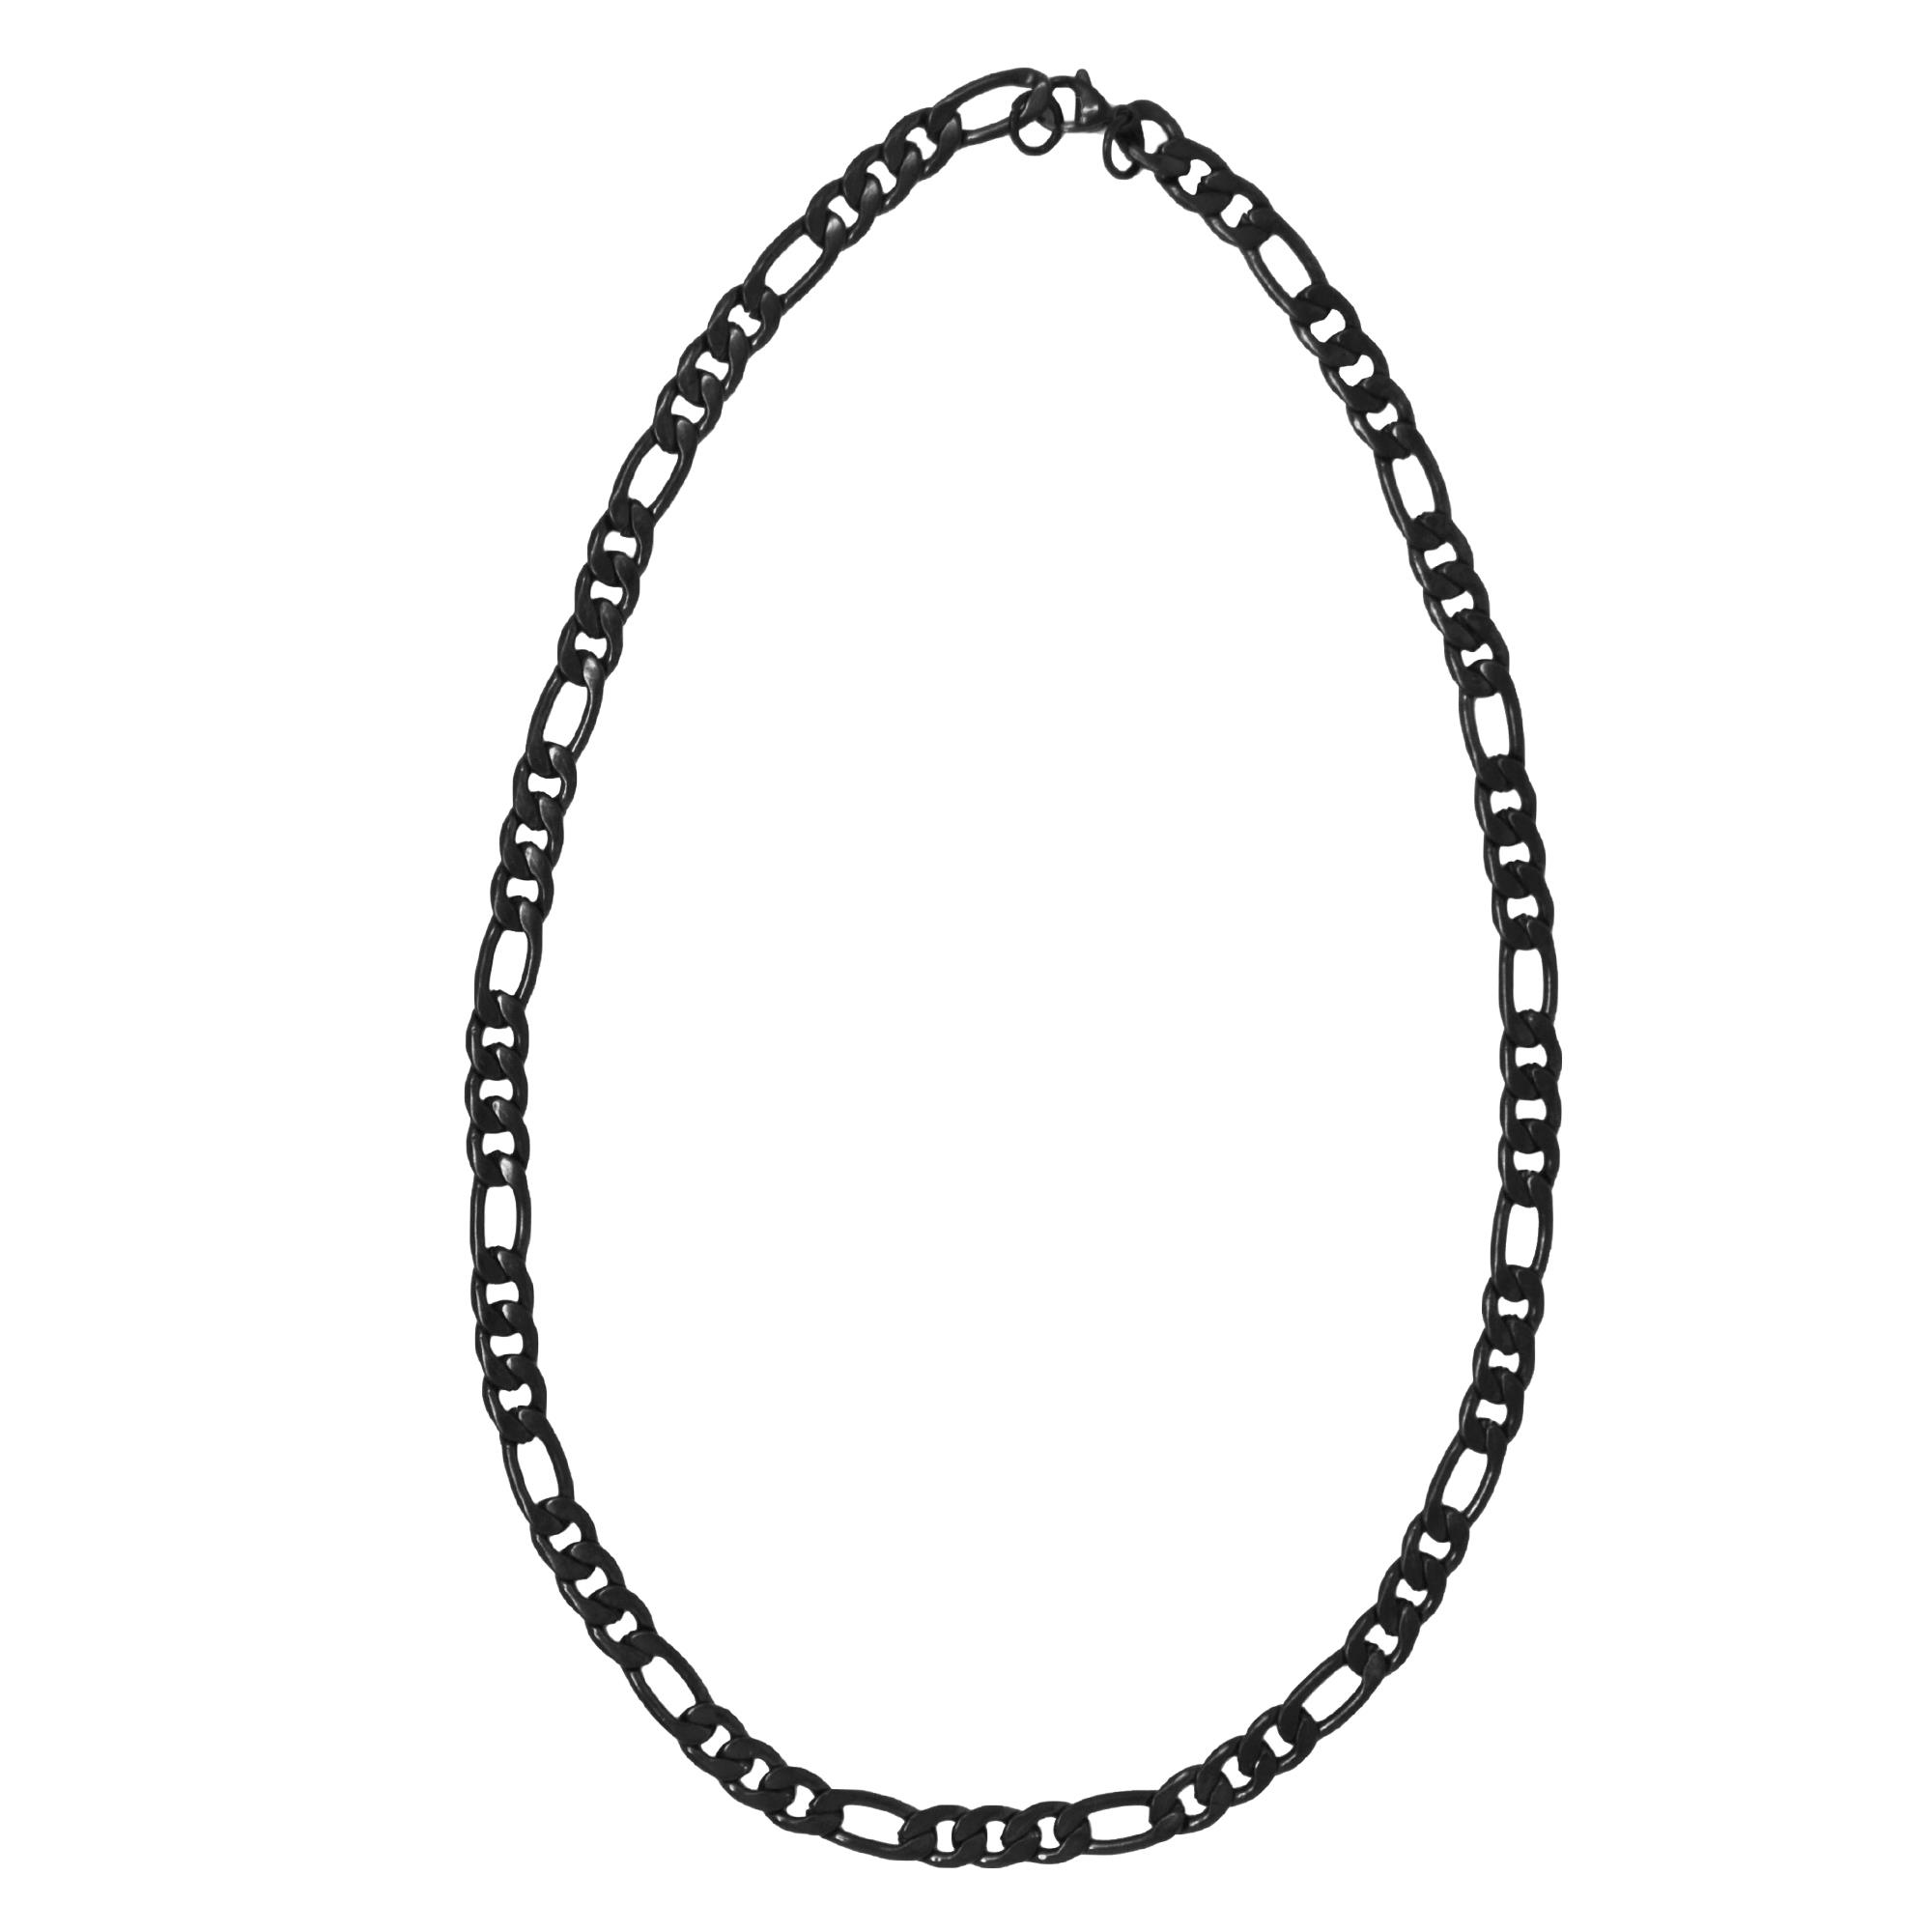 STAINLESS STEEL CHAIN LINK